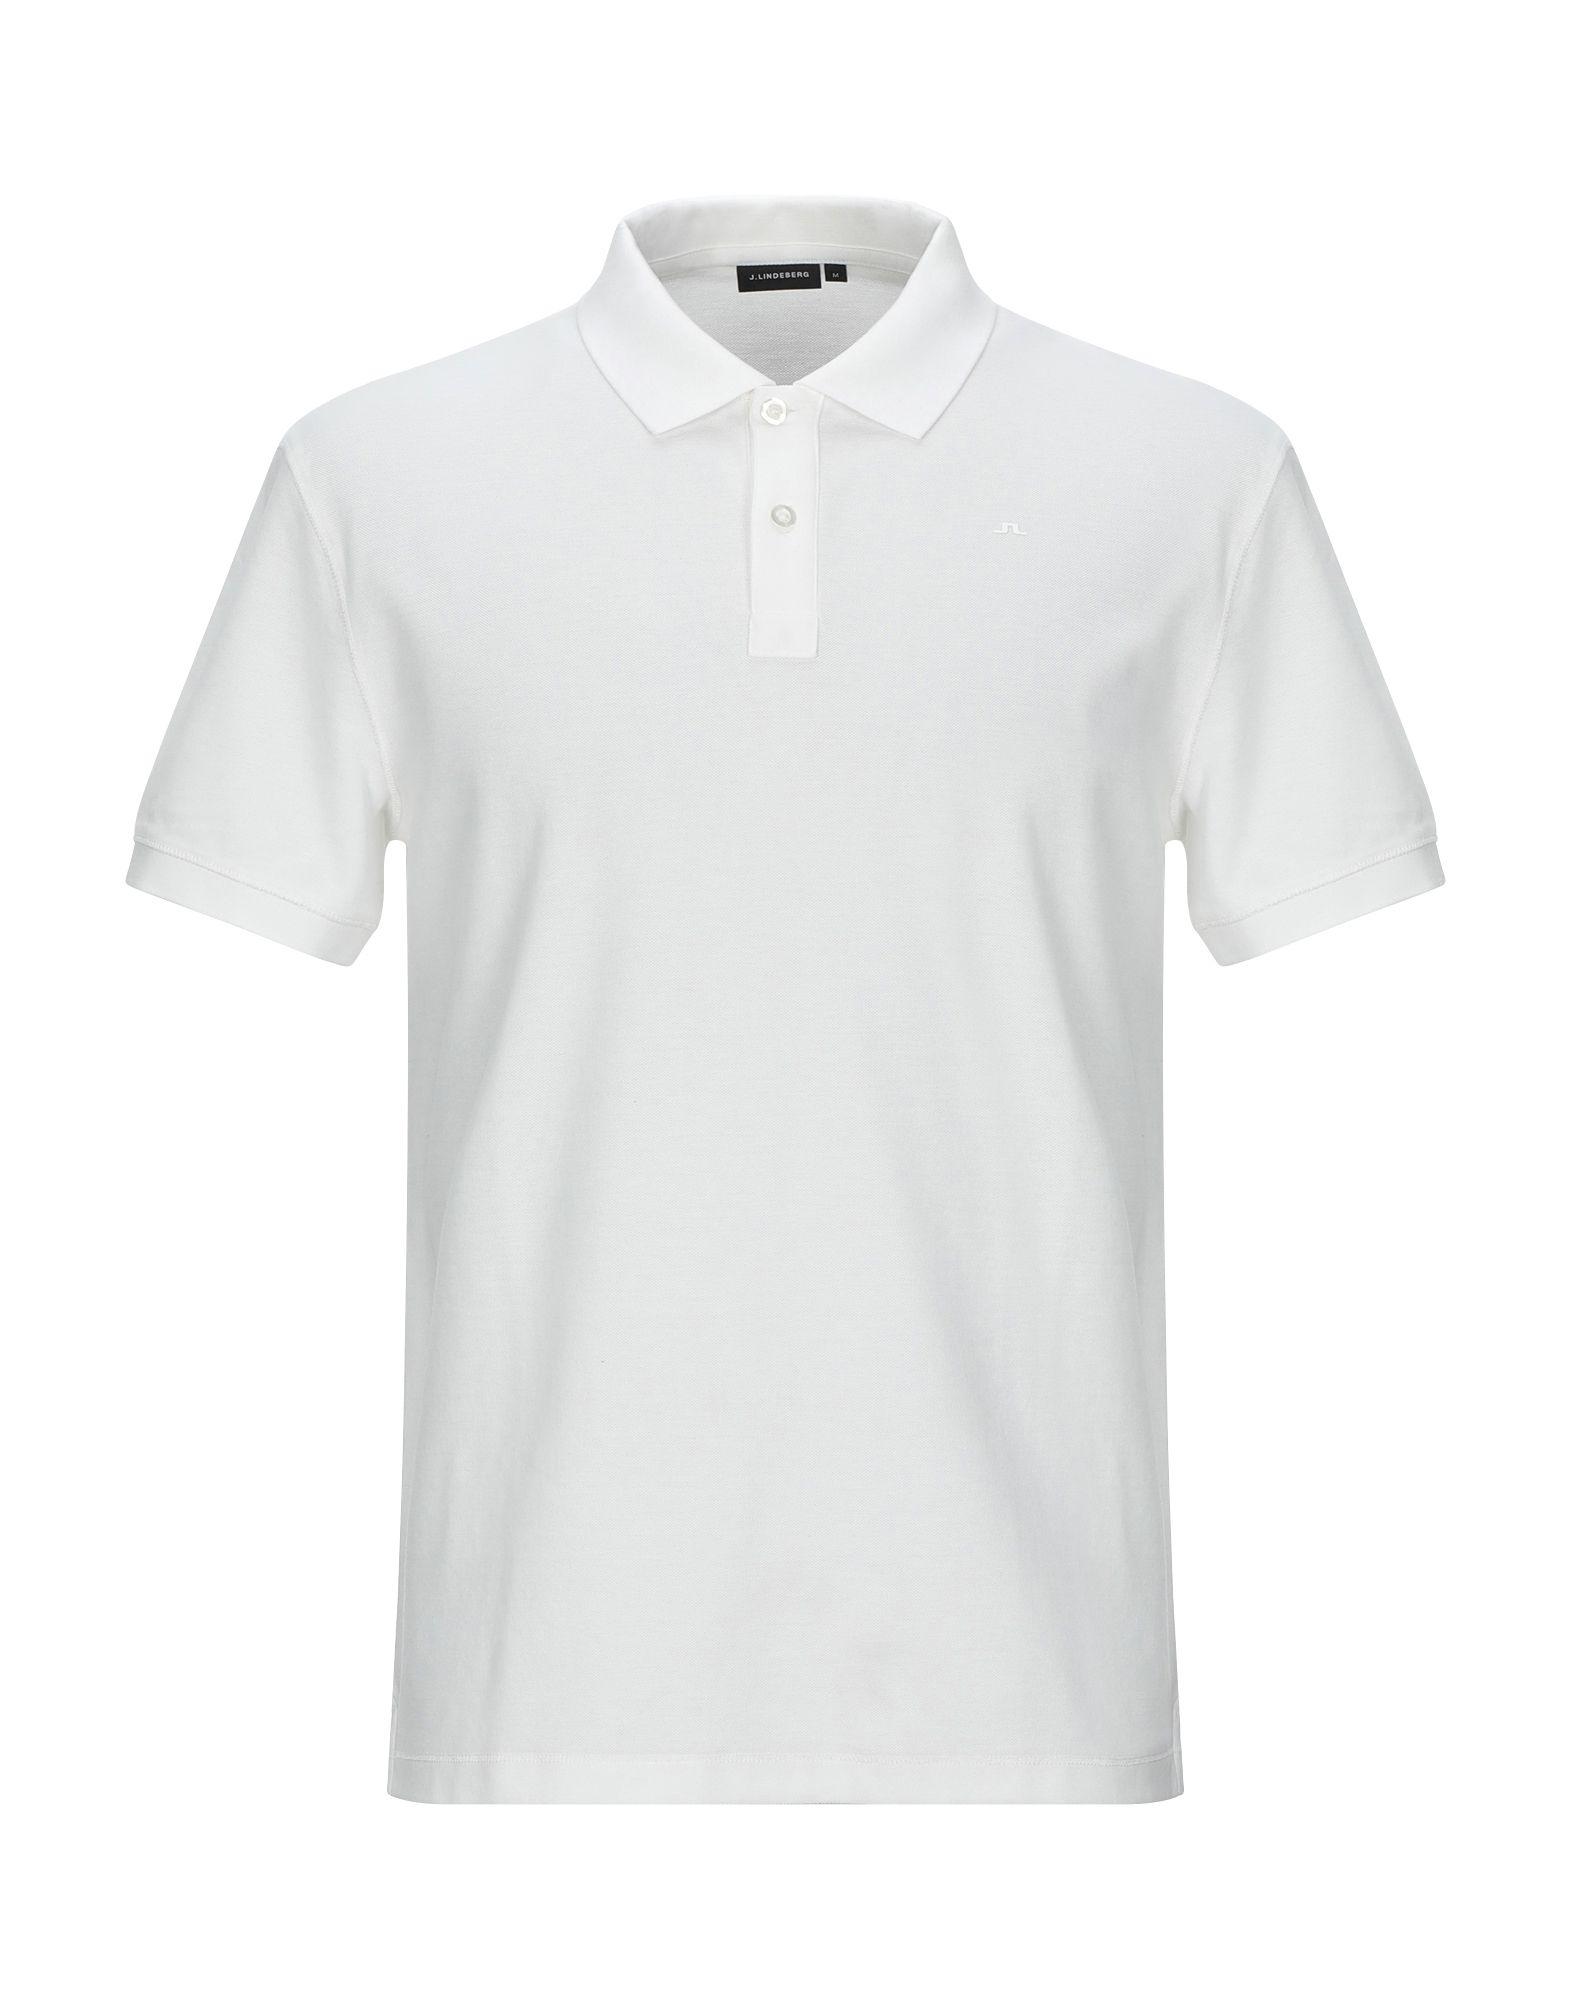 J.Lindeberg Cotton Polo Shirt in White for Men - Lyst